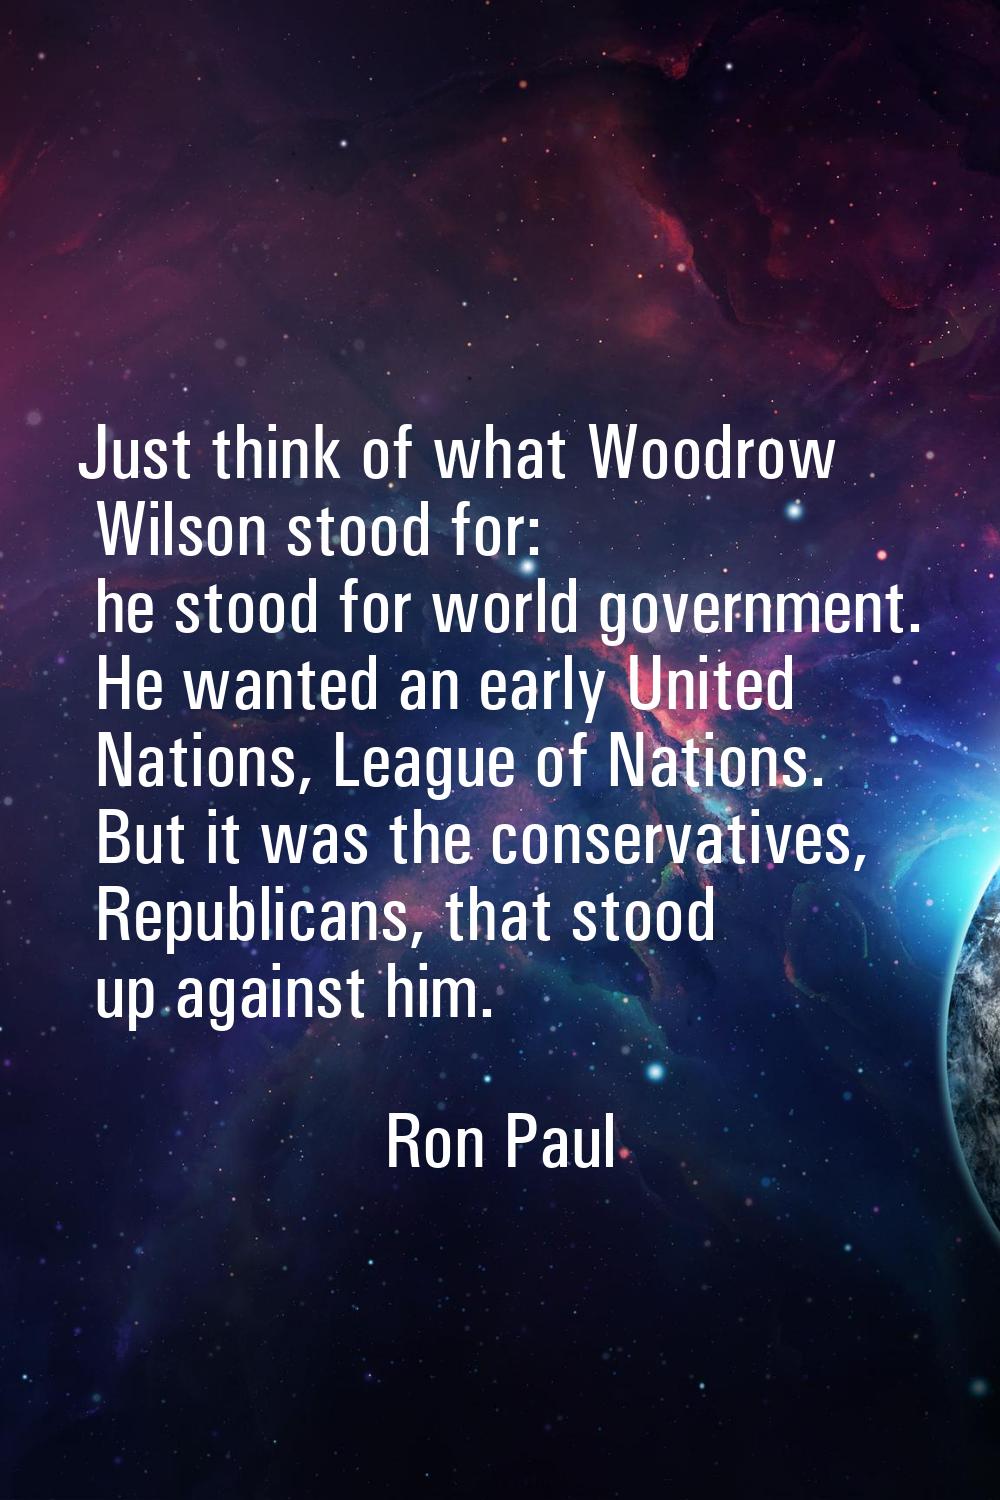 Just think of what Woodrow Wilson stood for: he stood for world government. He wanted an early Unit